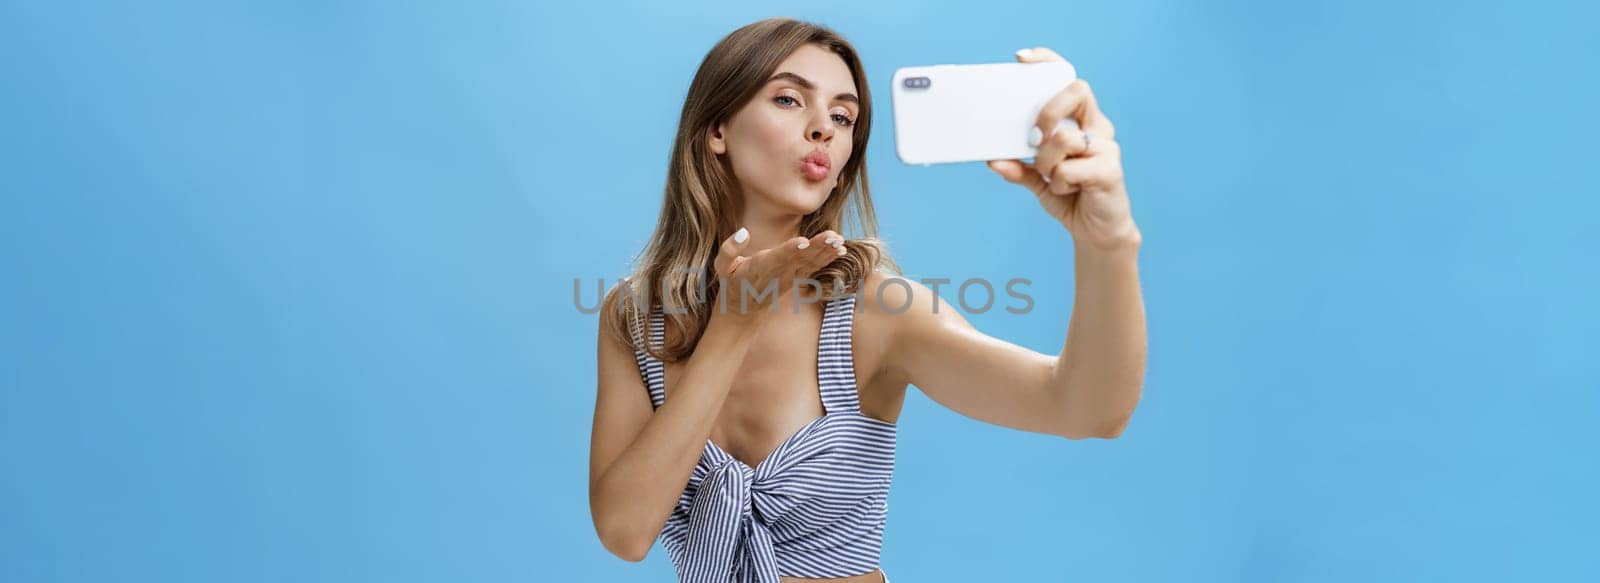 Outgoing and self-assured glamorous woman like taking pictures of herself holding smartphone making sensual and flirty selfie folding lips raising palm to send wind kiss at screen loving followers. Technology, lifestyle, social network concept